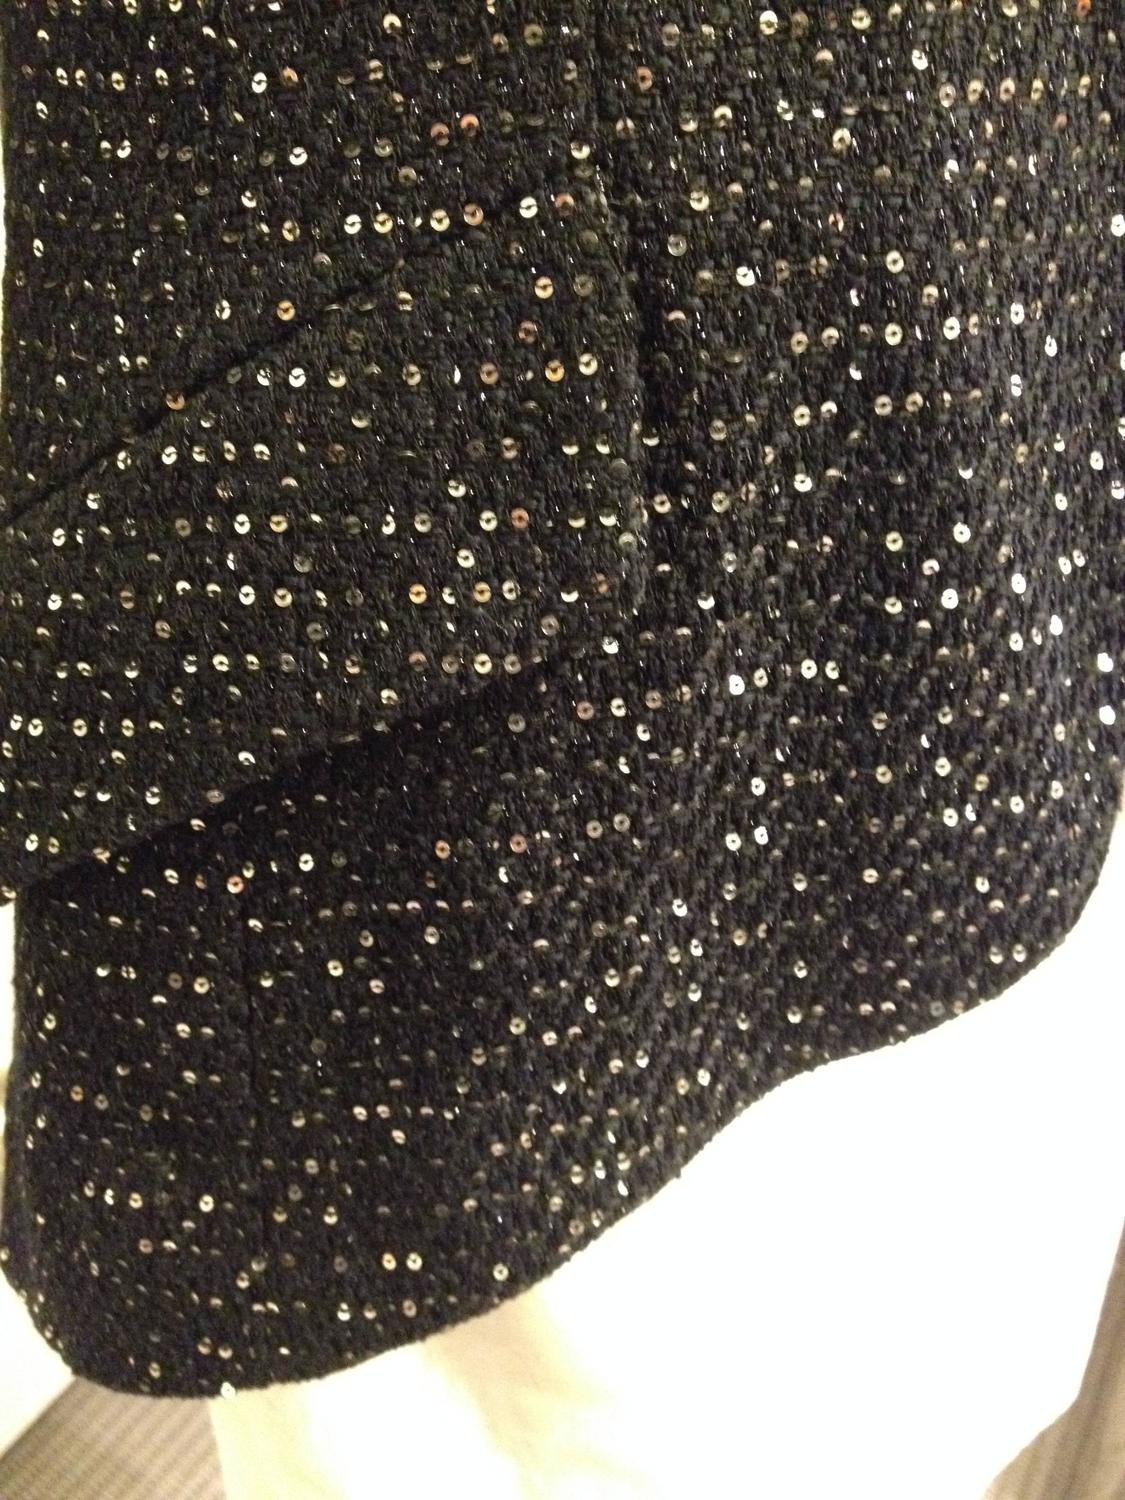 Chanel Black Tweed Jacket with Sequins Size 36 (4) For Sale at 1stdibs